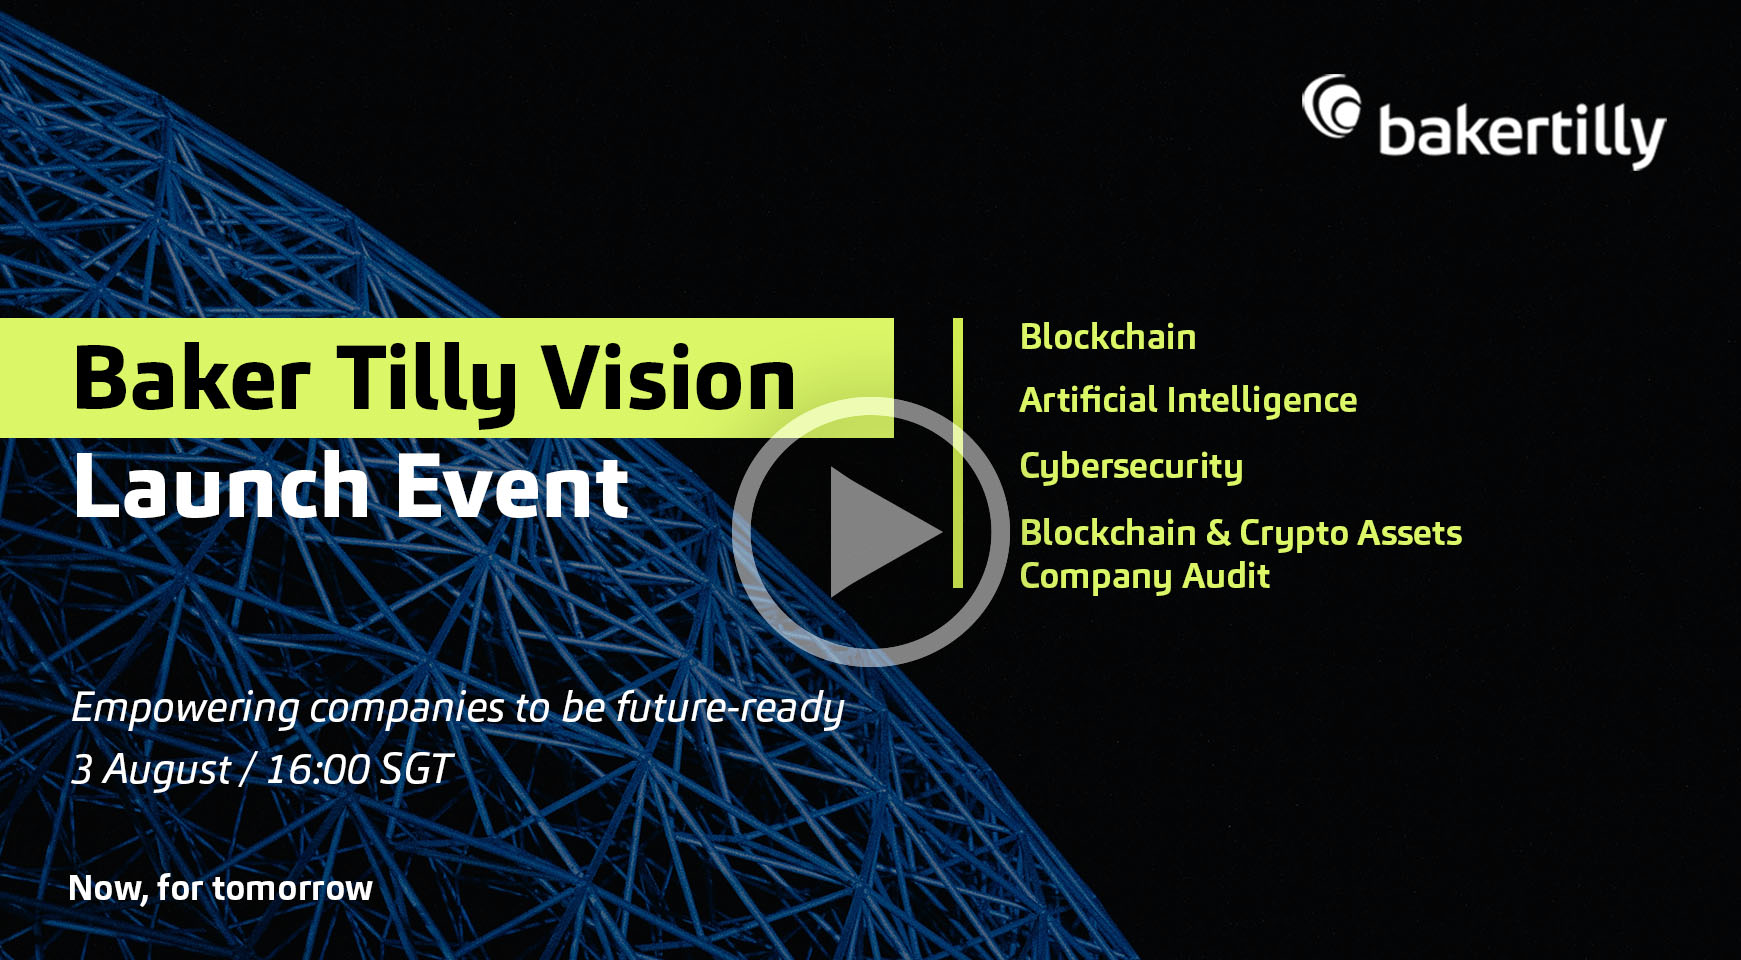 Baker Tilly Vision Launch_Singapore_Blockchain_AI_Cybersecurity_Crypto Assets